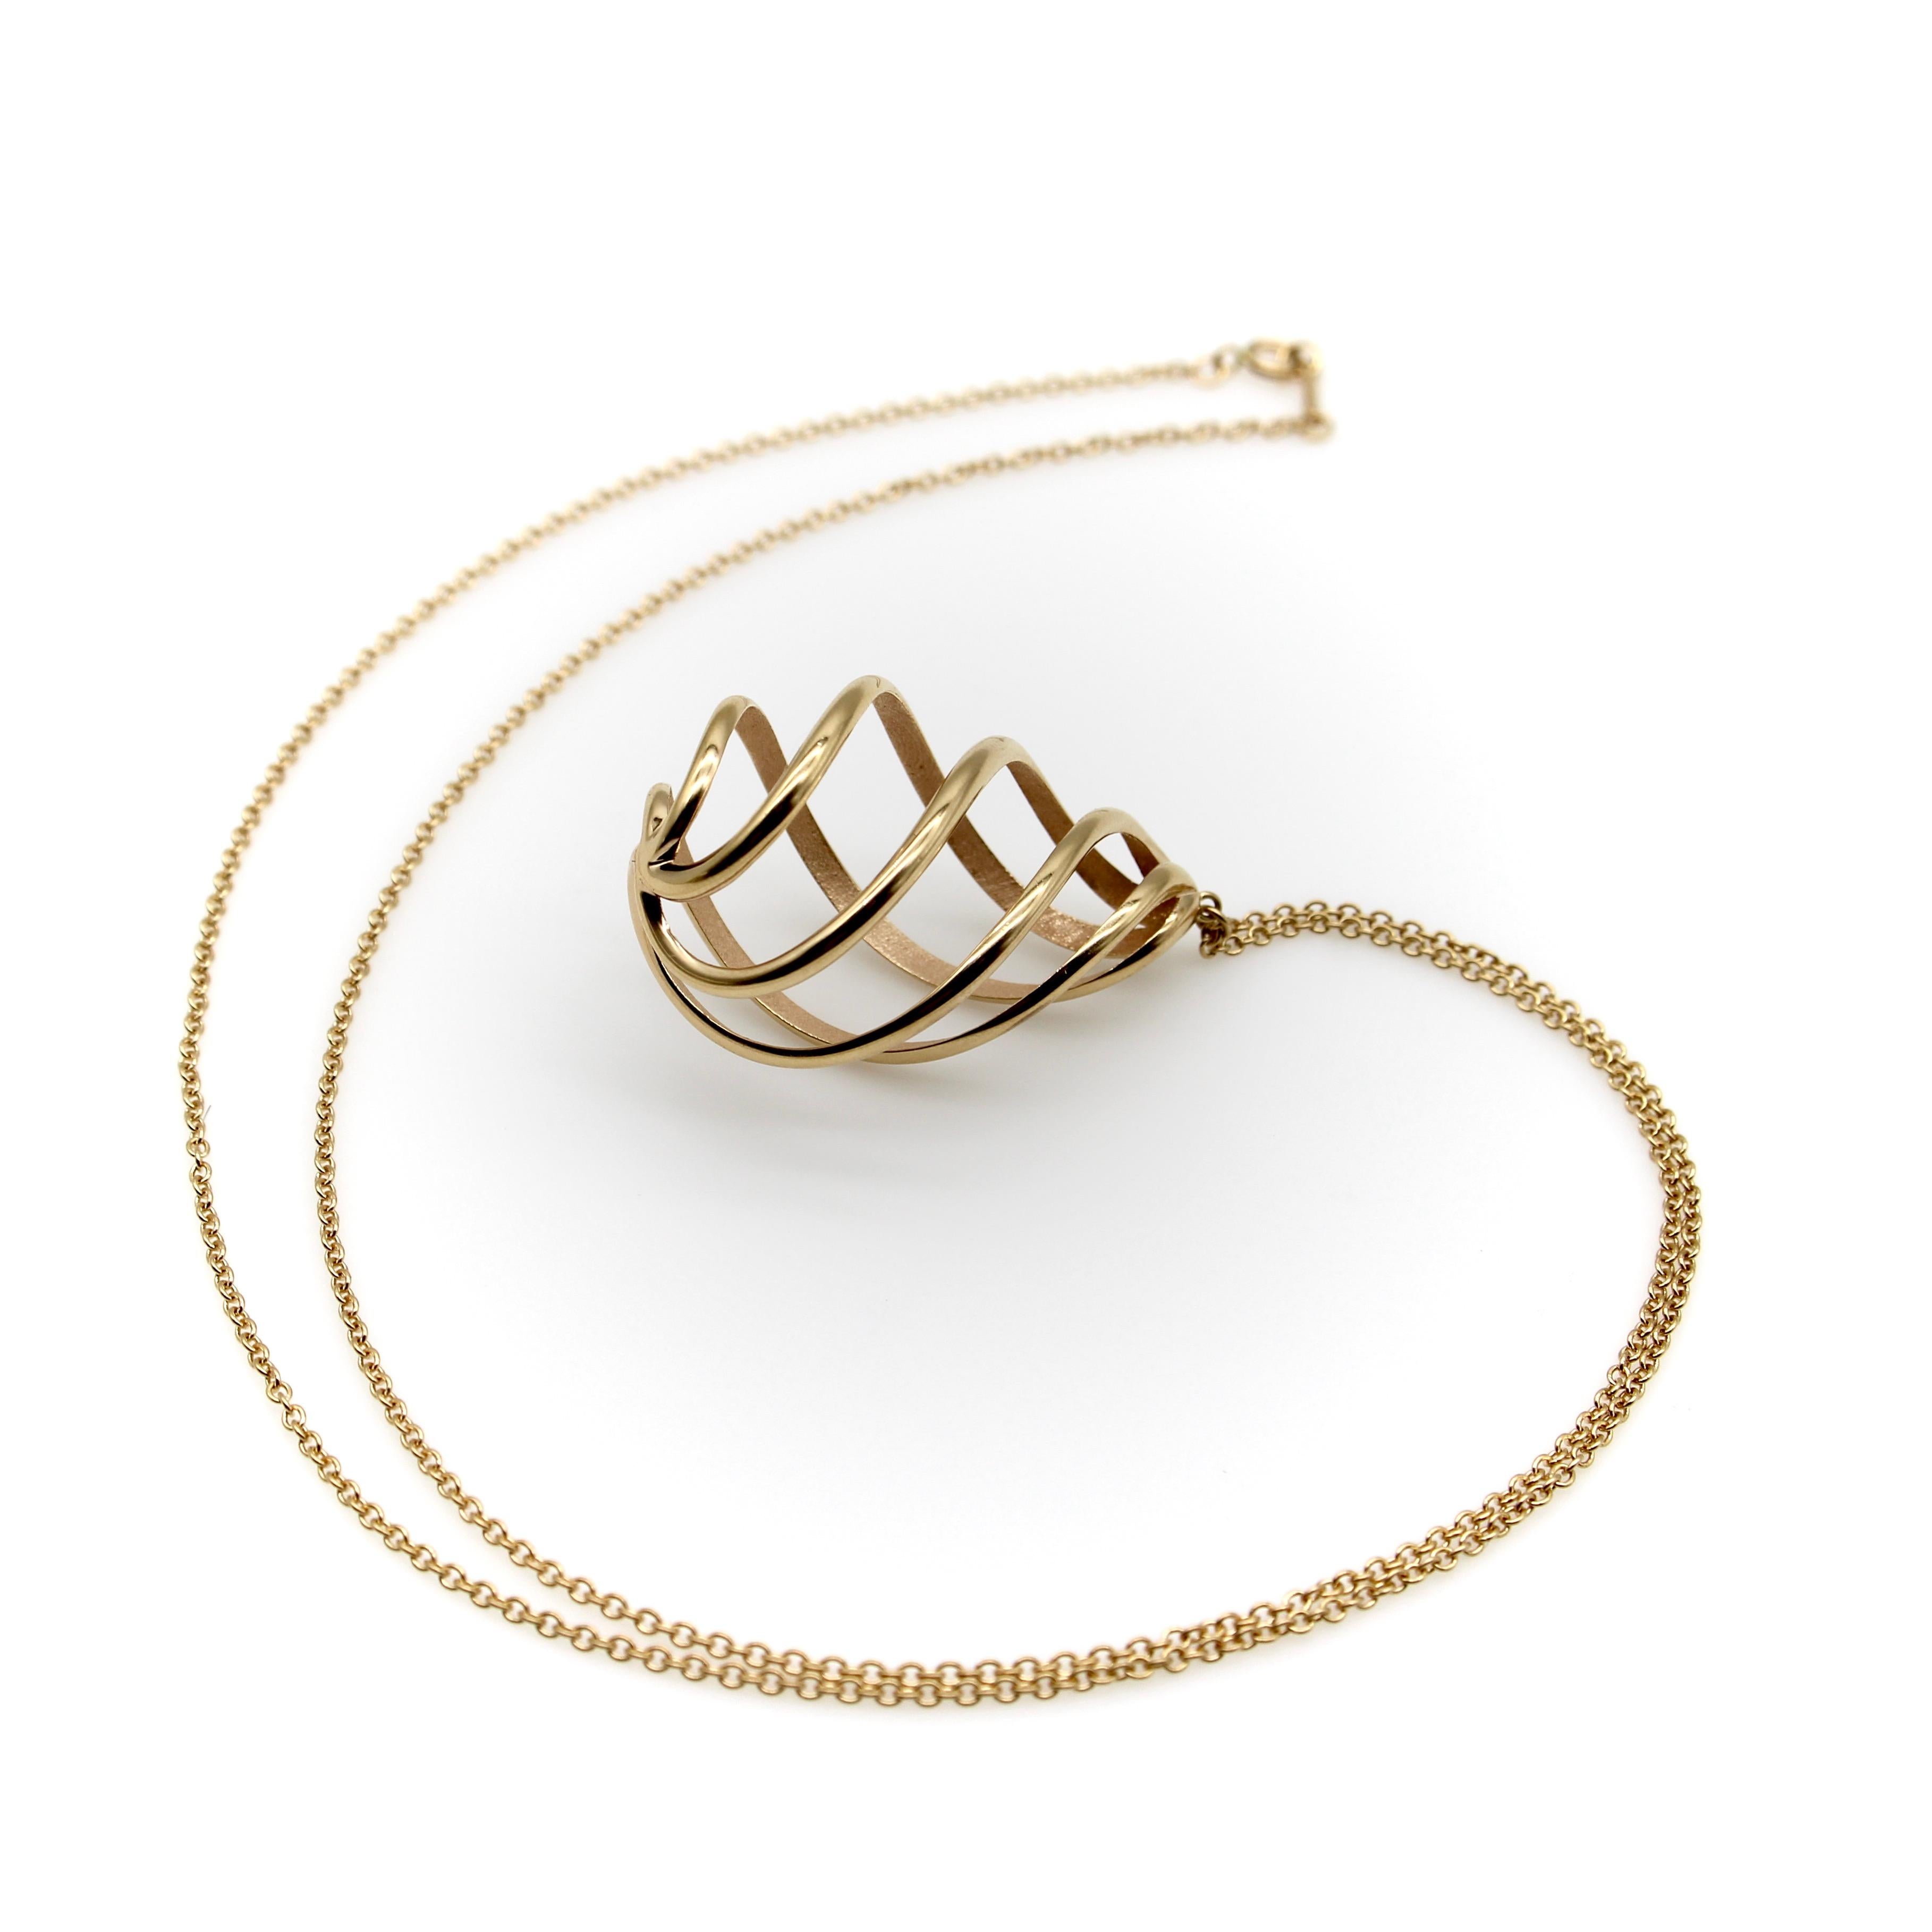 Designed by Paloma Picasso for Tiffany & Co., this 18k gold spiral pendant necklace is a highly sought-after retired shape. A spiral of 18k gold with a rosy patina creates this mesmerizing egg-shaped pendant. The exterior of the spiral has a glossy